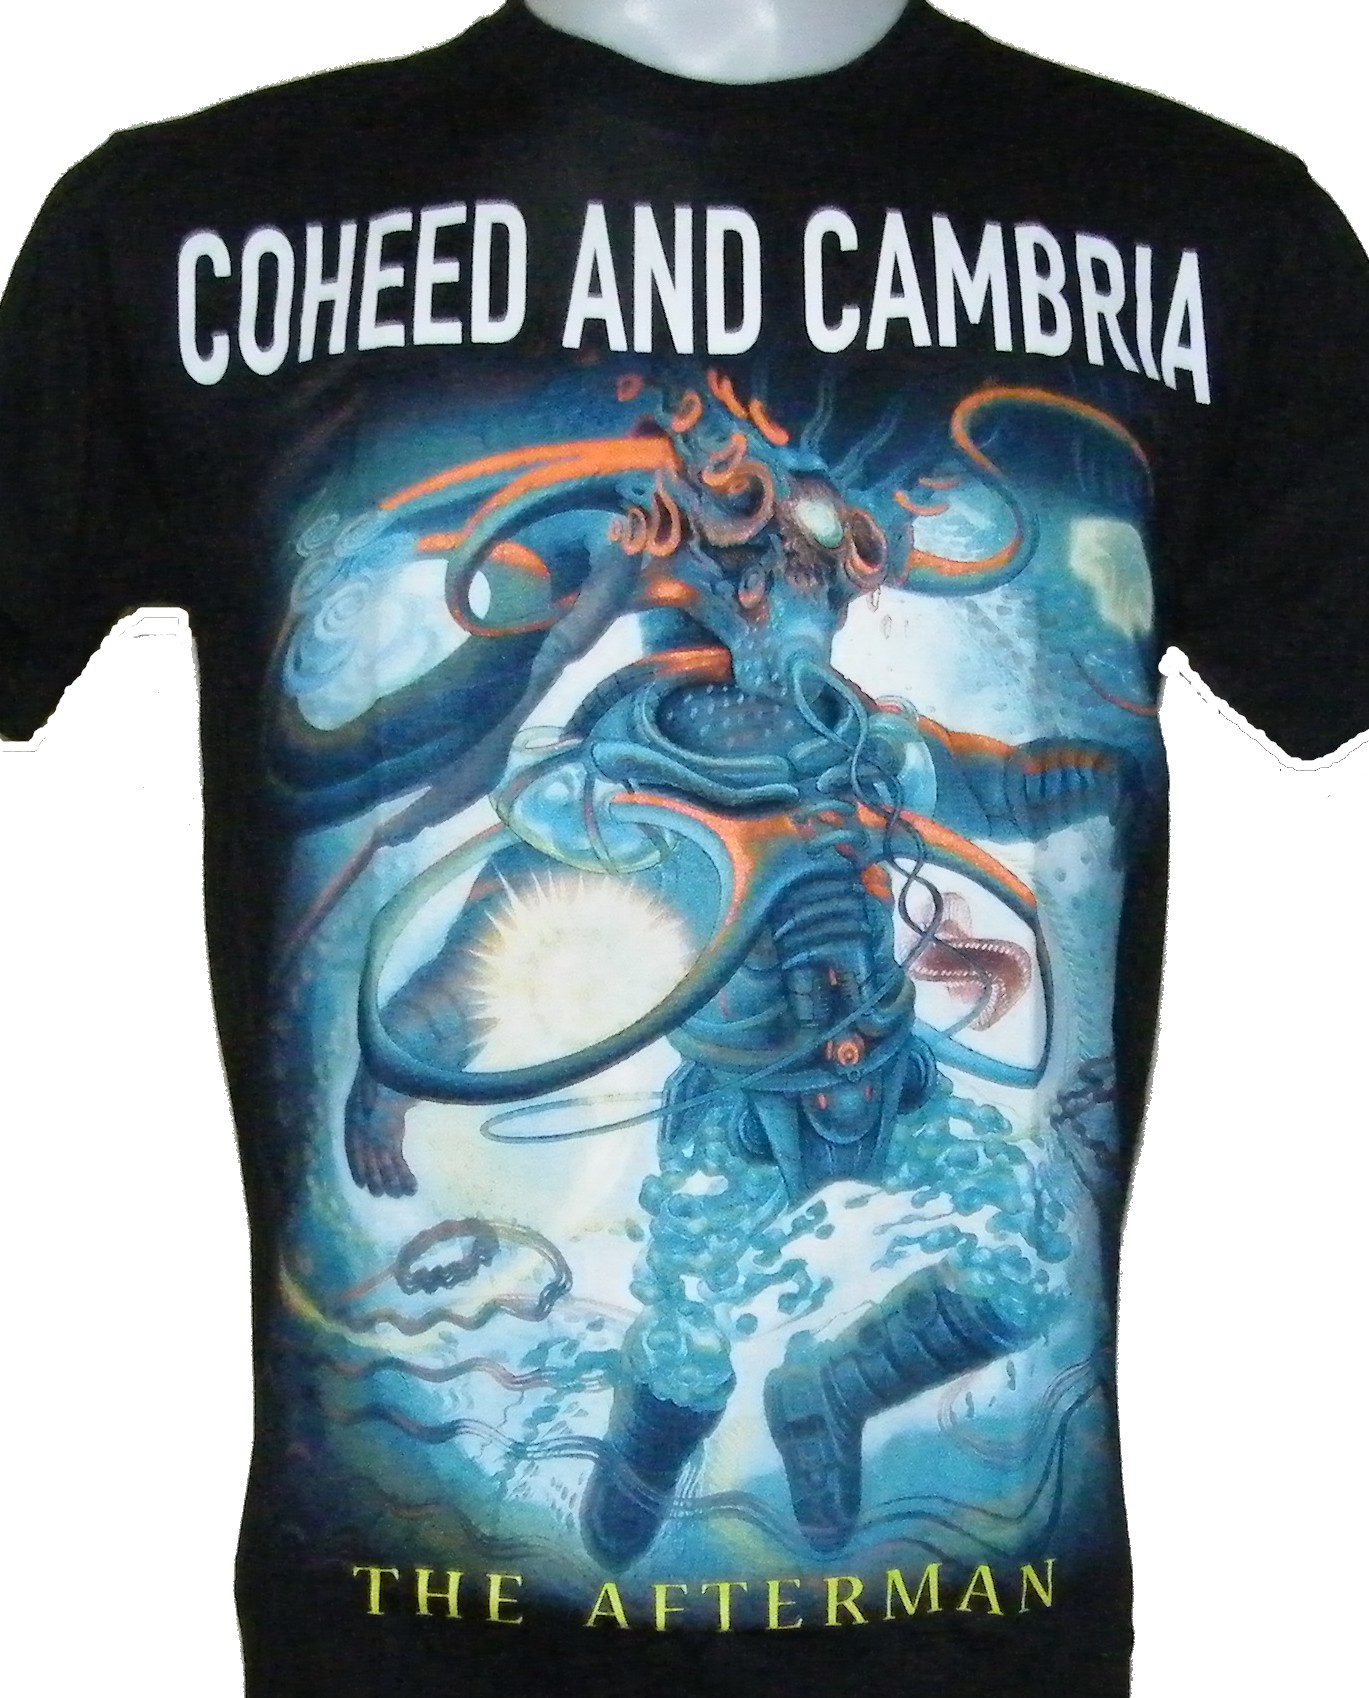 NOT Mens Coheed and Cambria Trend T Shirt 